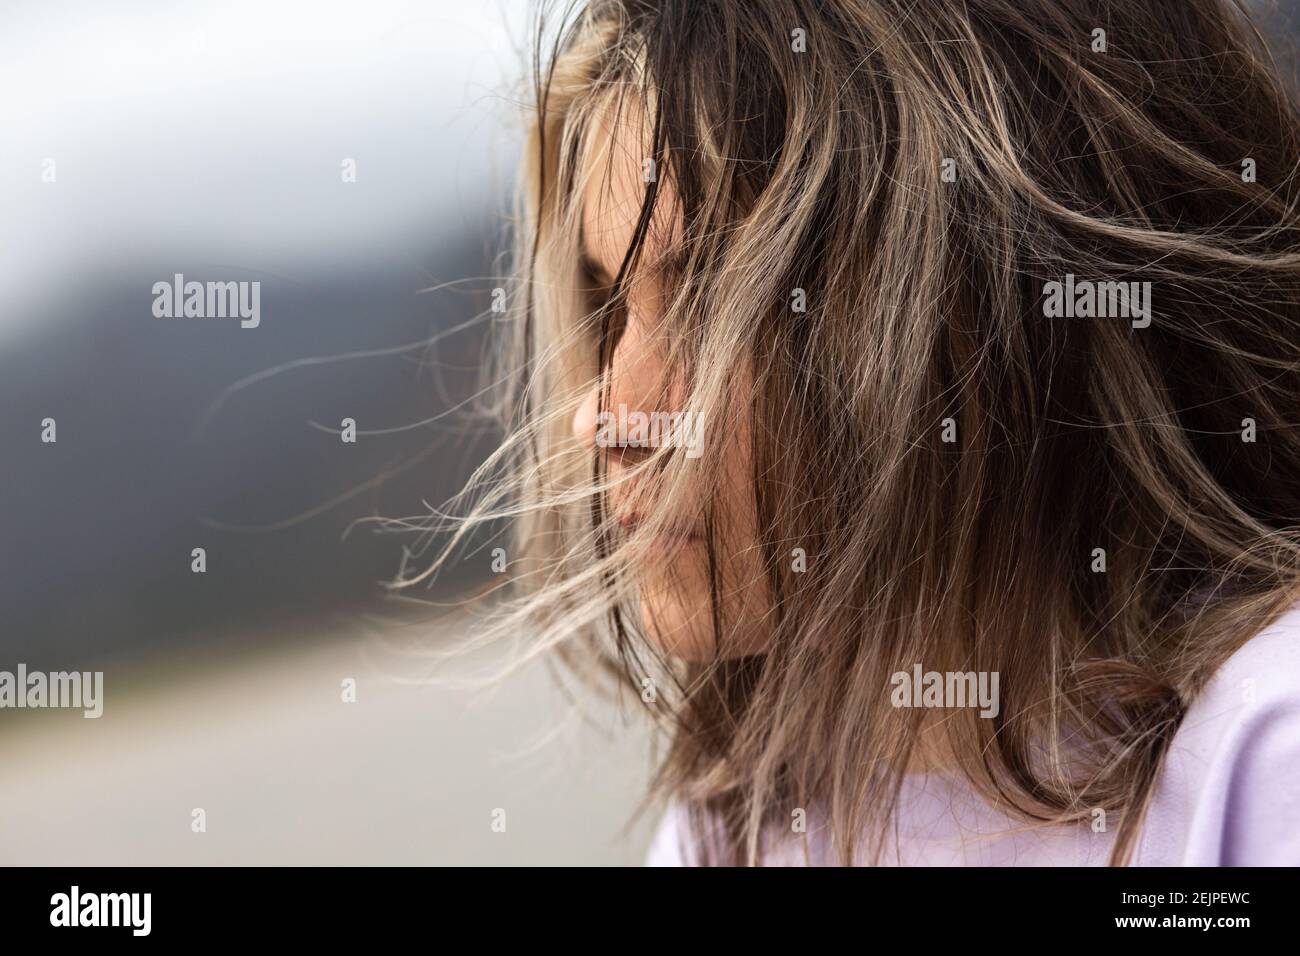 Young girl's hair blowing in the wind Stock Photo